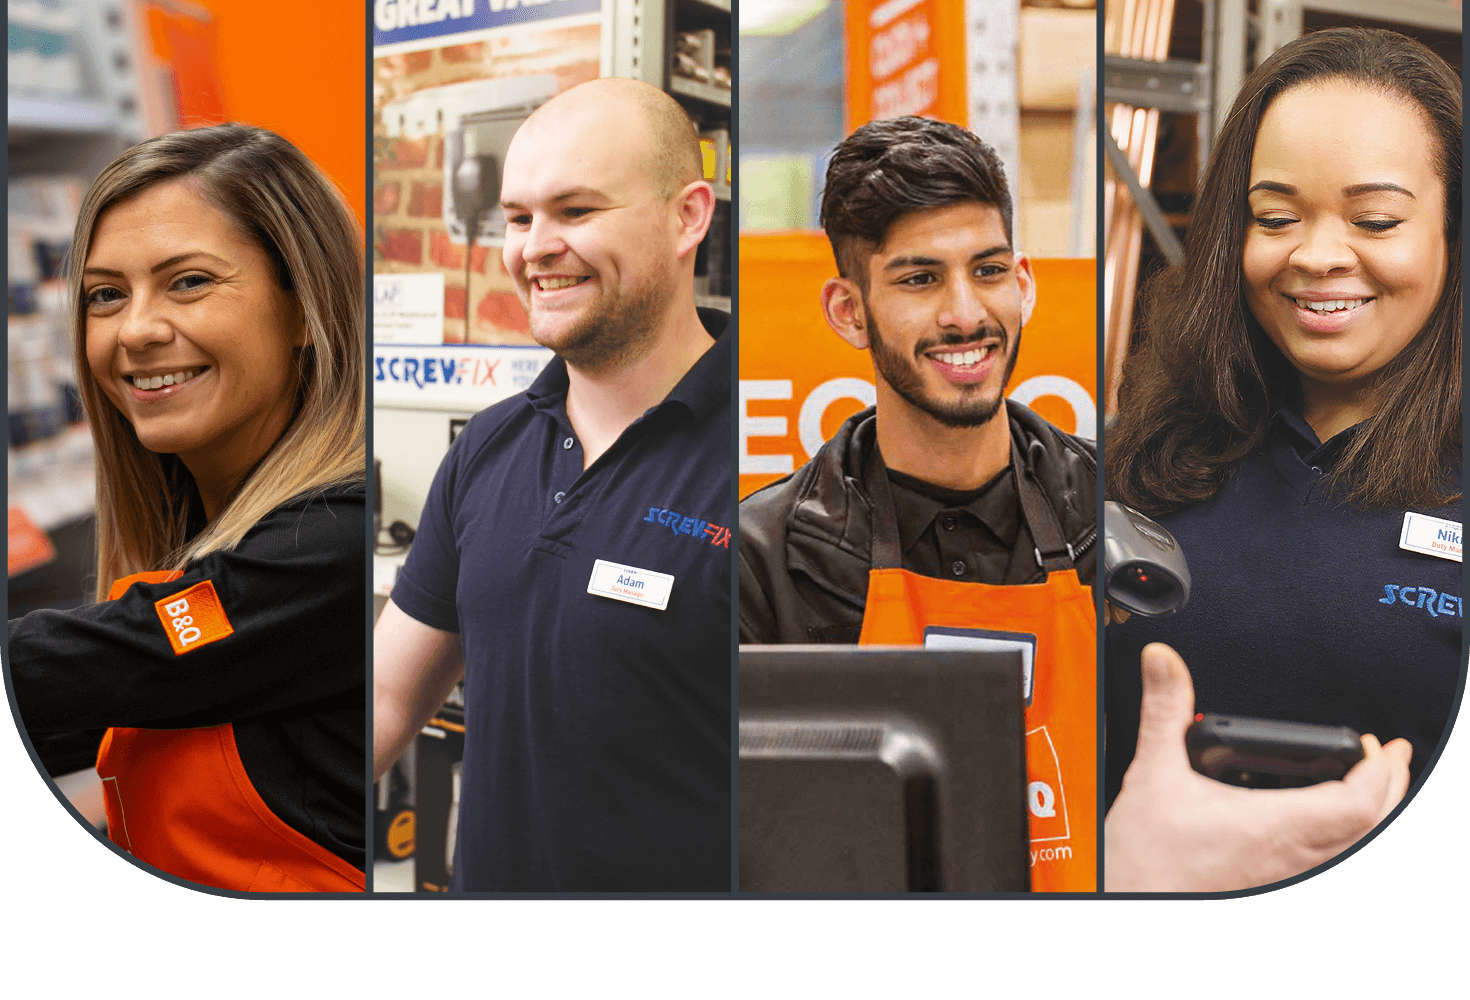 a photo montage of B&Q and ScrewFix colleagues